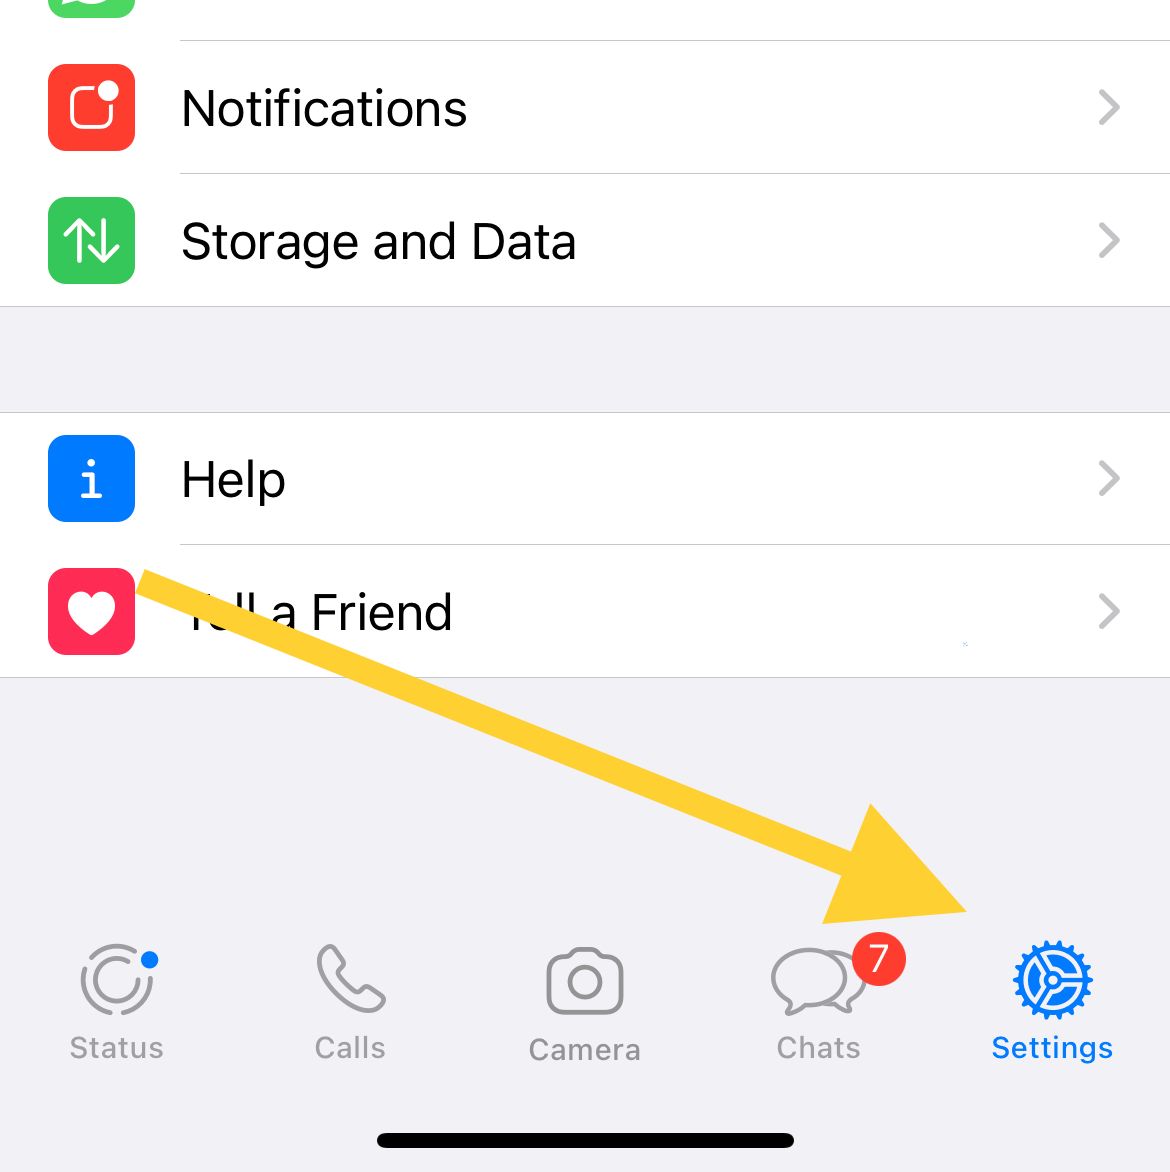 How To Fix a WhatsApp Profile Pic Not Showing